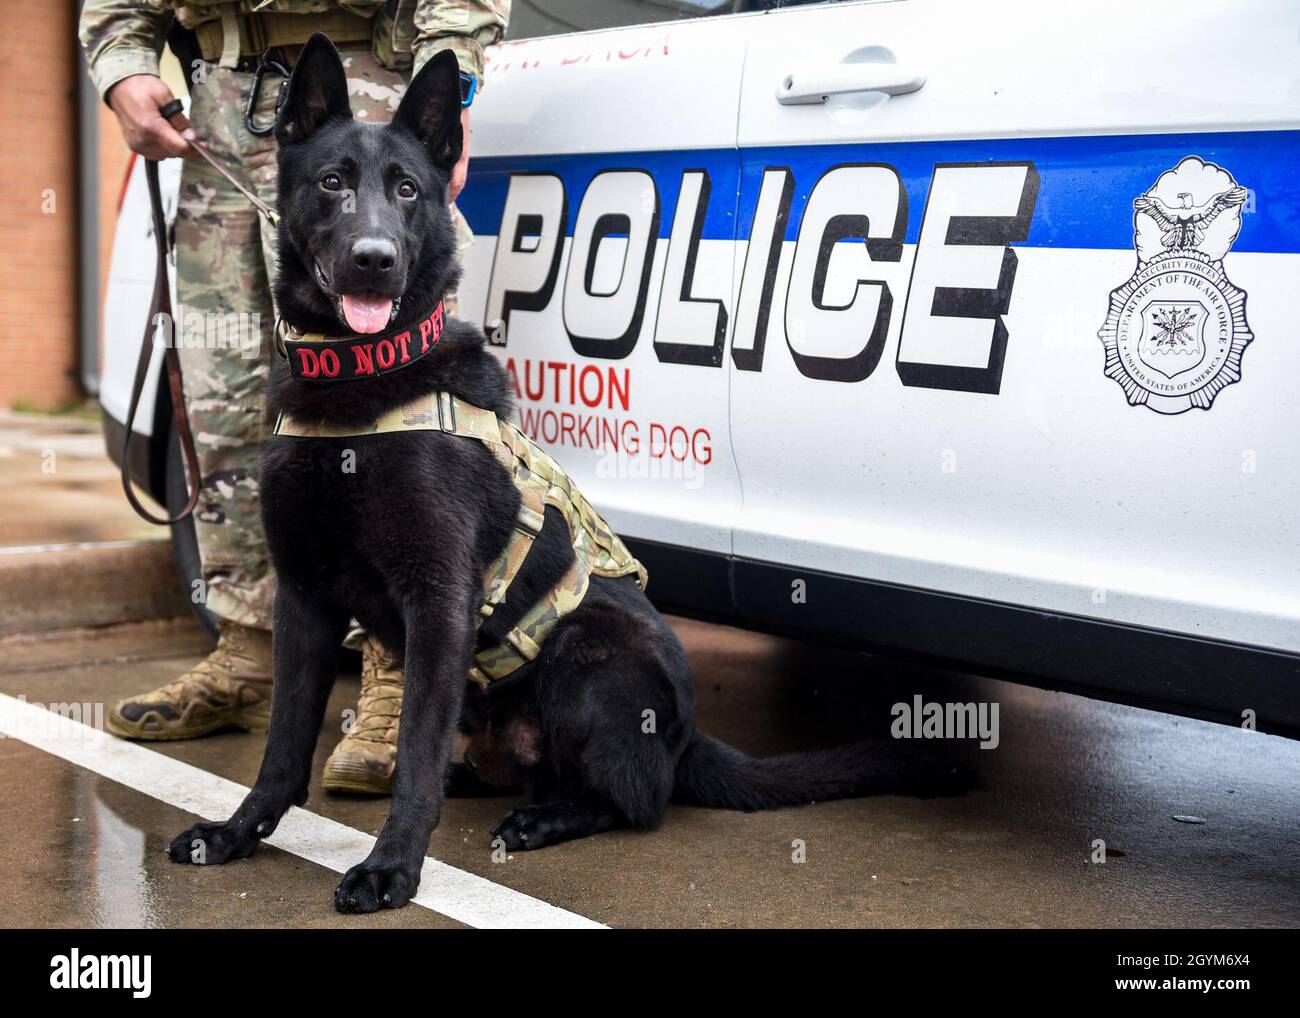 Bady, 82nd Security Forces military working dog, poses for a picture in front of a security forces vehicle at Sheppard Air Force Base, Texas, Jan 28, 2020. Staff Sgt. Austin Williams is Bady's handler and they work together to sniff out drugs, explosive ordinance and other discrepancies to help keep Sheppard AFB safe. (U.S. Air Force photo by Senior Airman Pedro Tenorio) Stock Photo